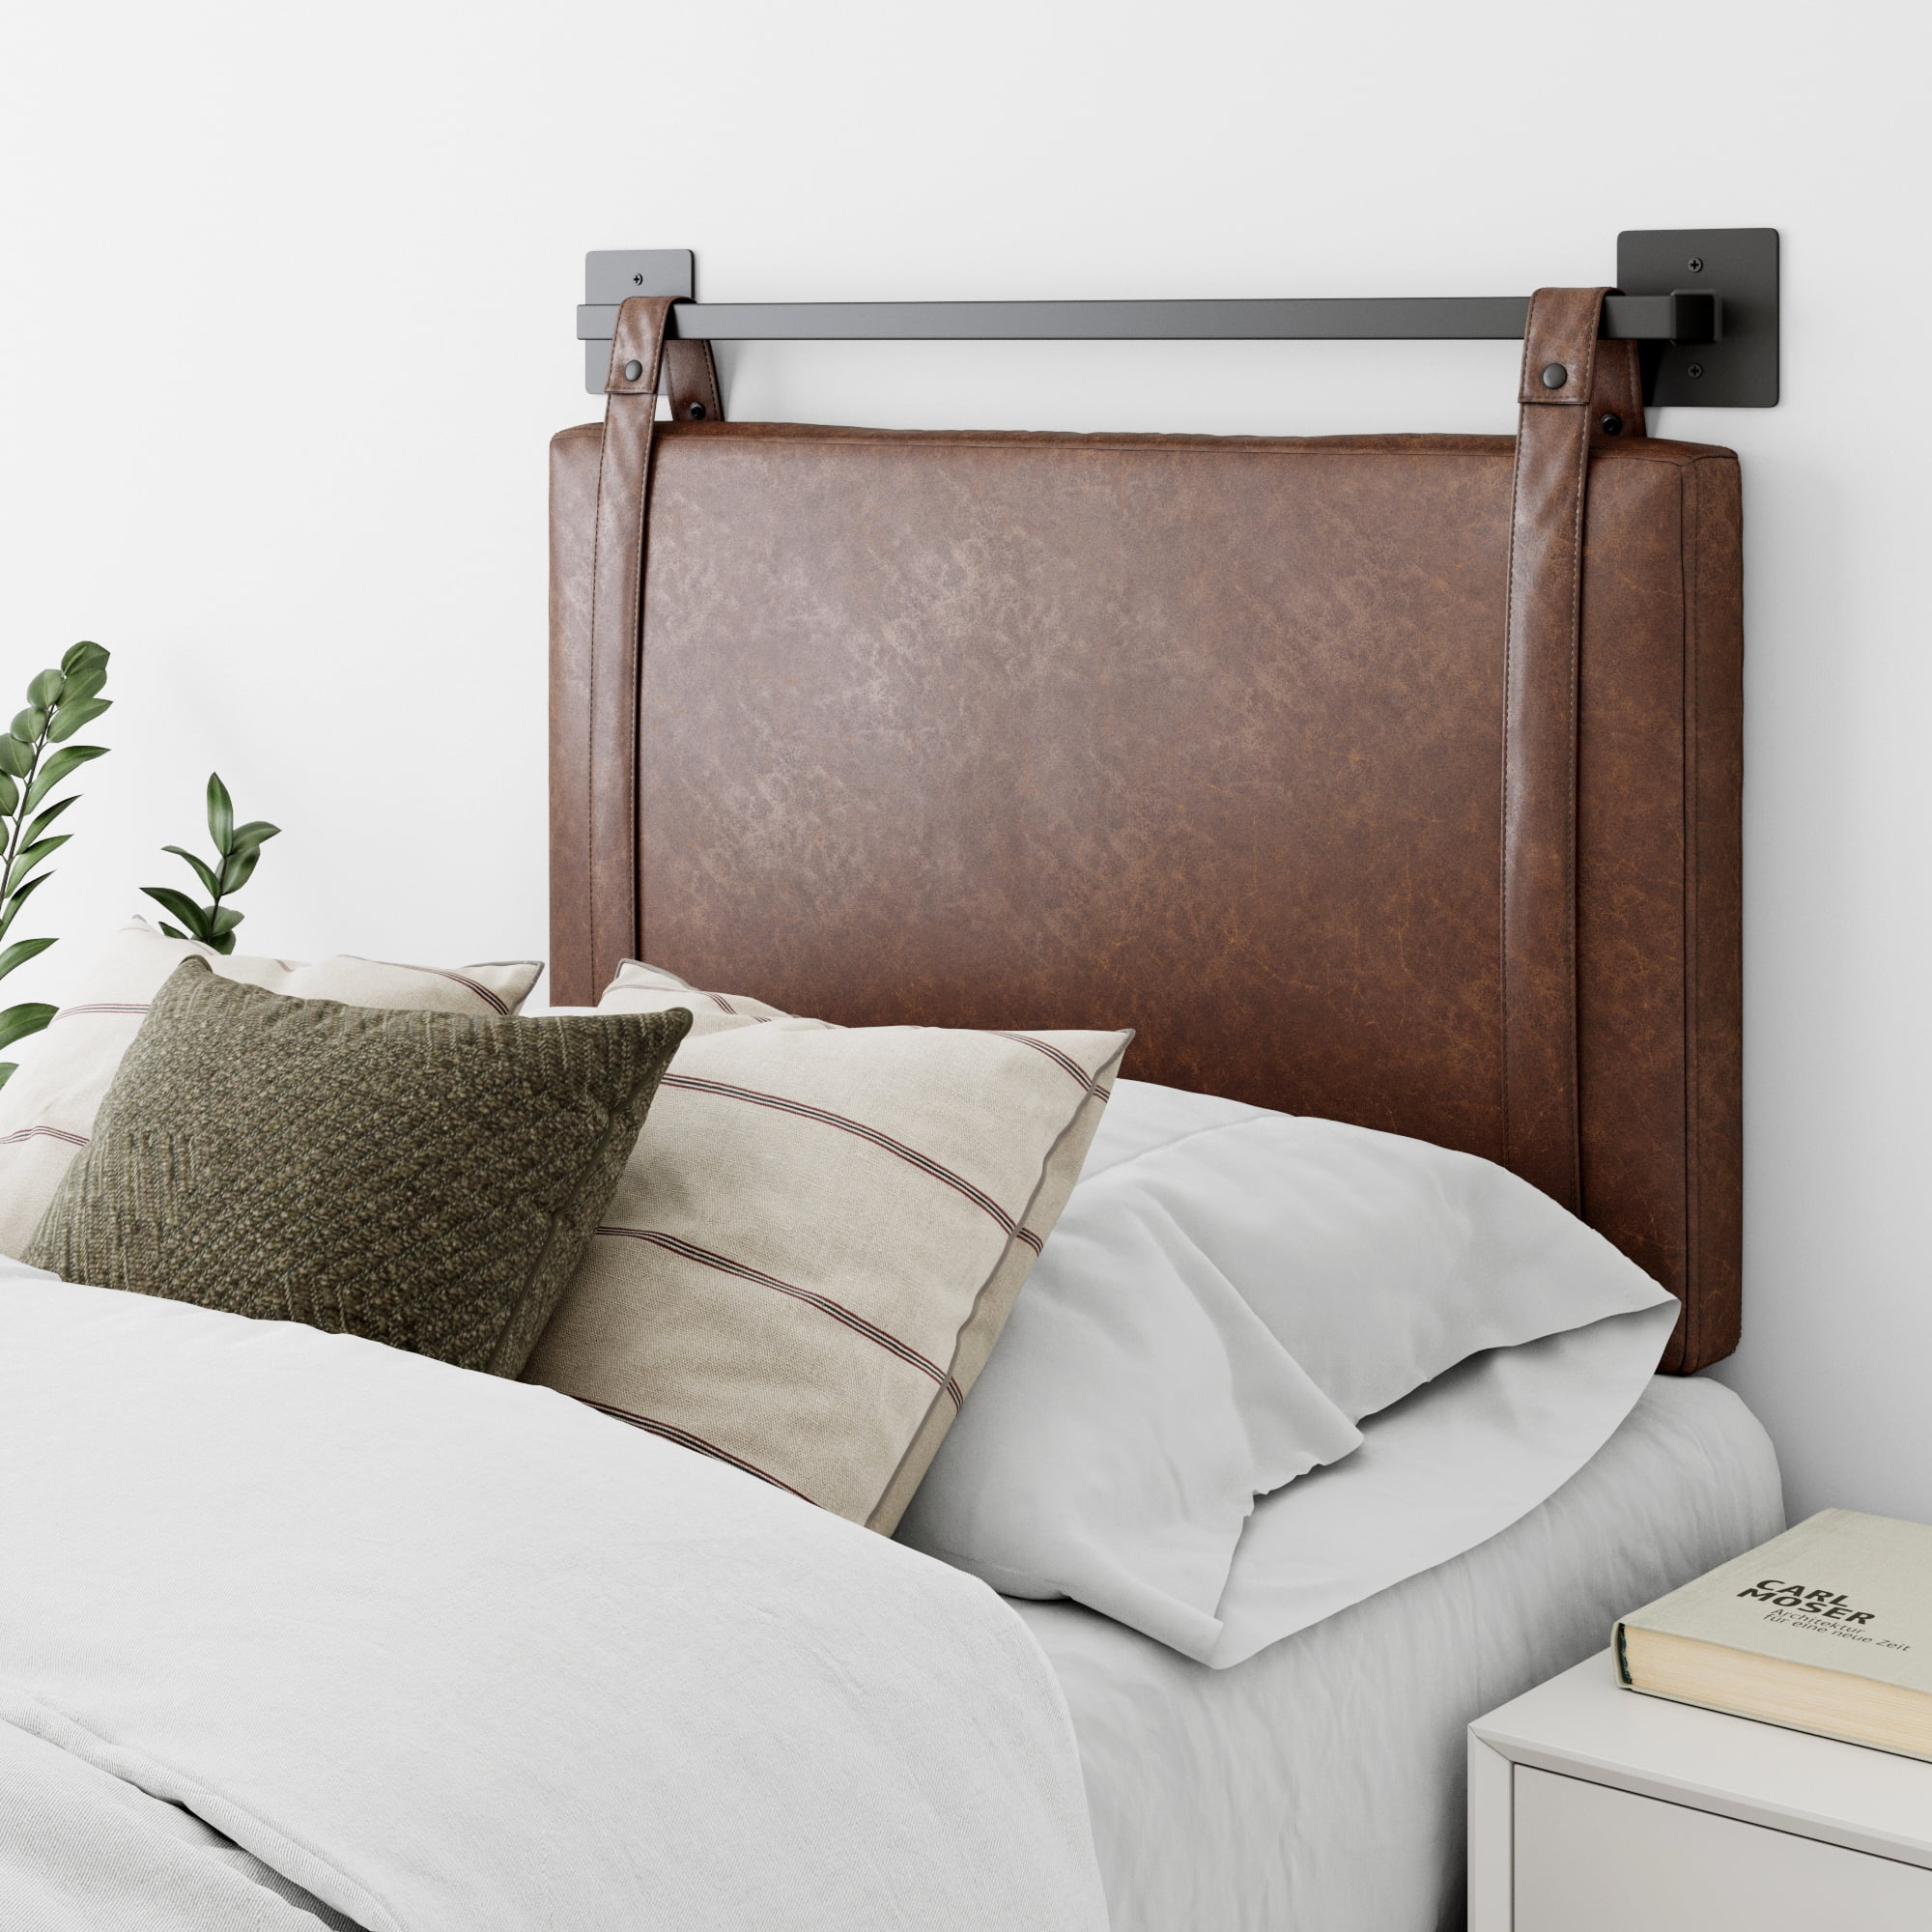 Nathan James Harlow Twin Wall Mount, Faux Leather Upholstered Headboard